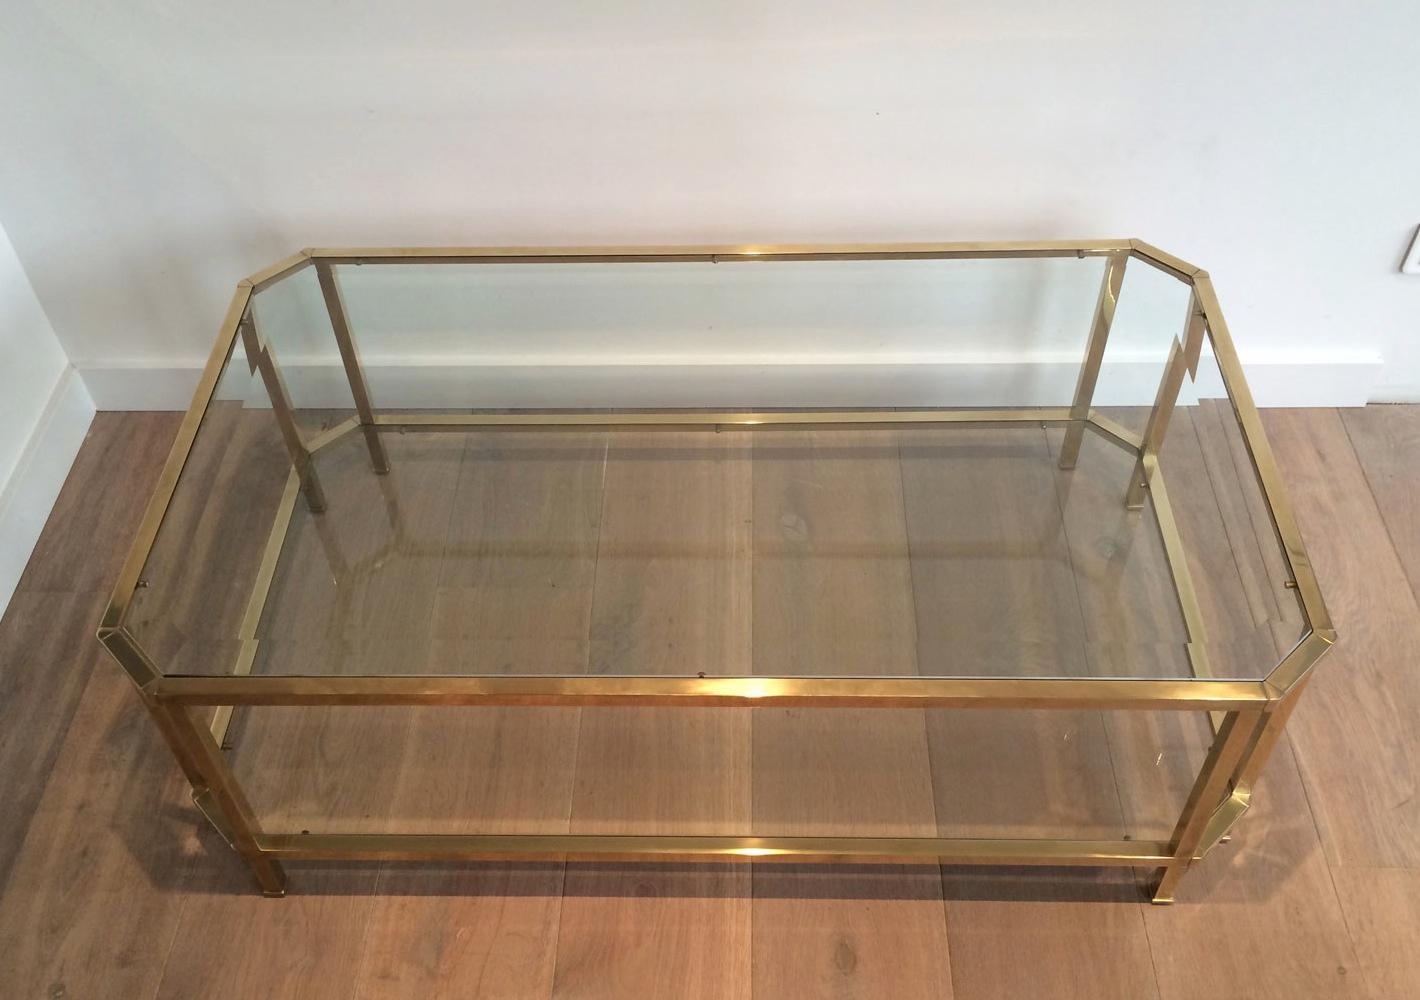 This very nice octagonal coffee table is made of brass with 2 clear glass shelves. This cocktail table was made by a French designer, circa 1970.